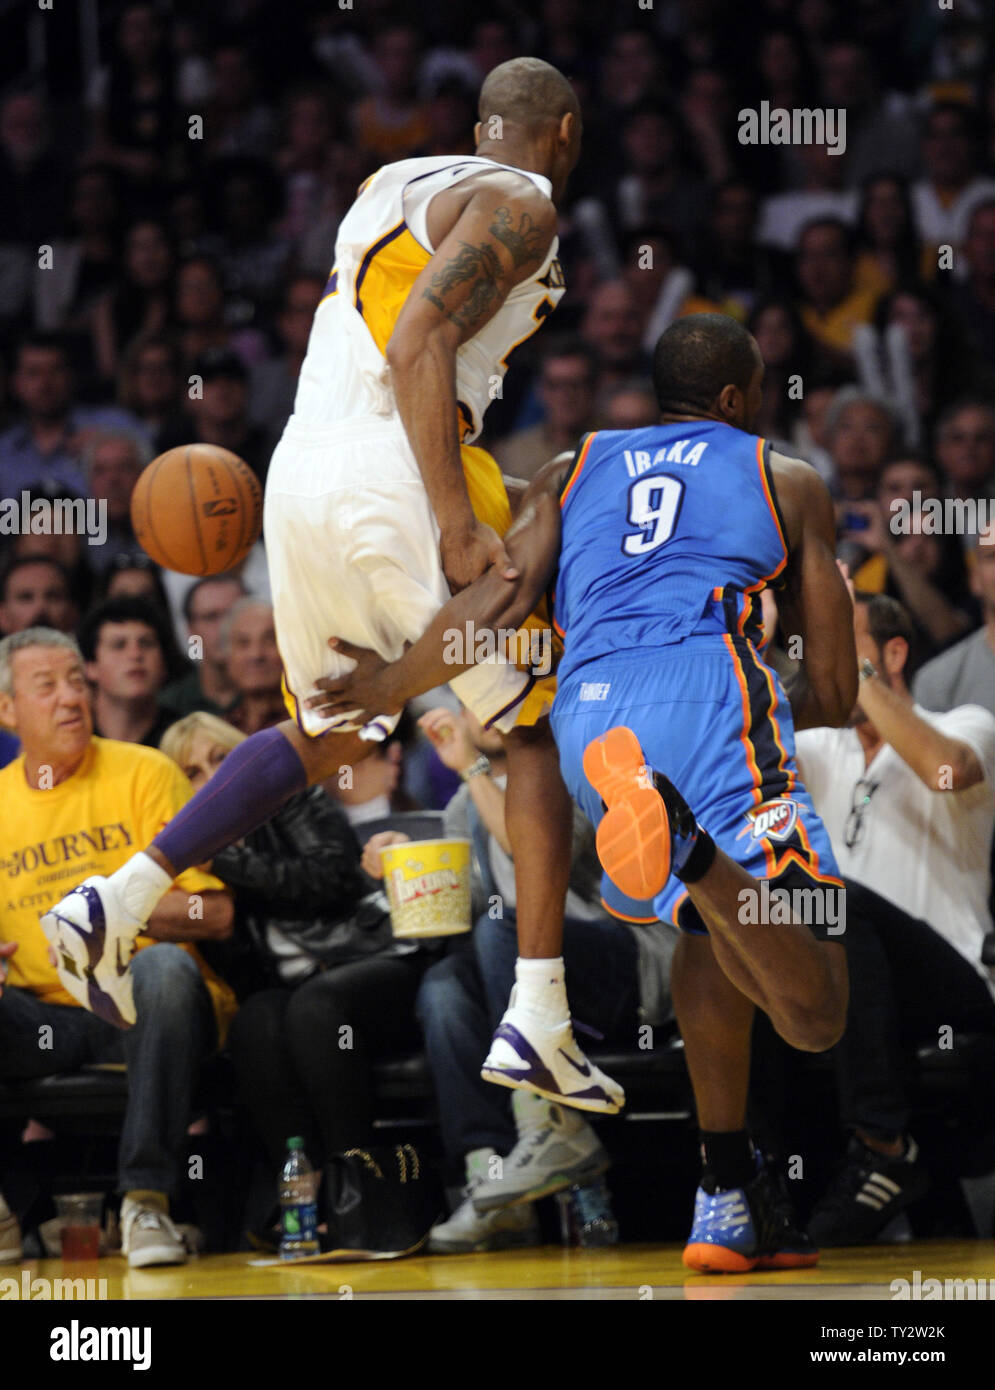 Los Angeles Lakers shooting guard Kobe Bryant (24) and Oklahoma City Thunder power forward Serge Ibaka (9) go for the ball and land in the court side seats in the second half of an NBA basketball game in Los Angeles on April 22, 2012.  The Lakers won 114-106.  UPI/Lori Shepler Stock Photo